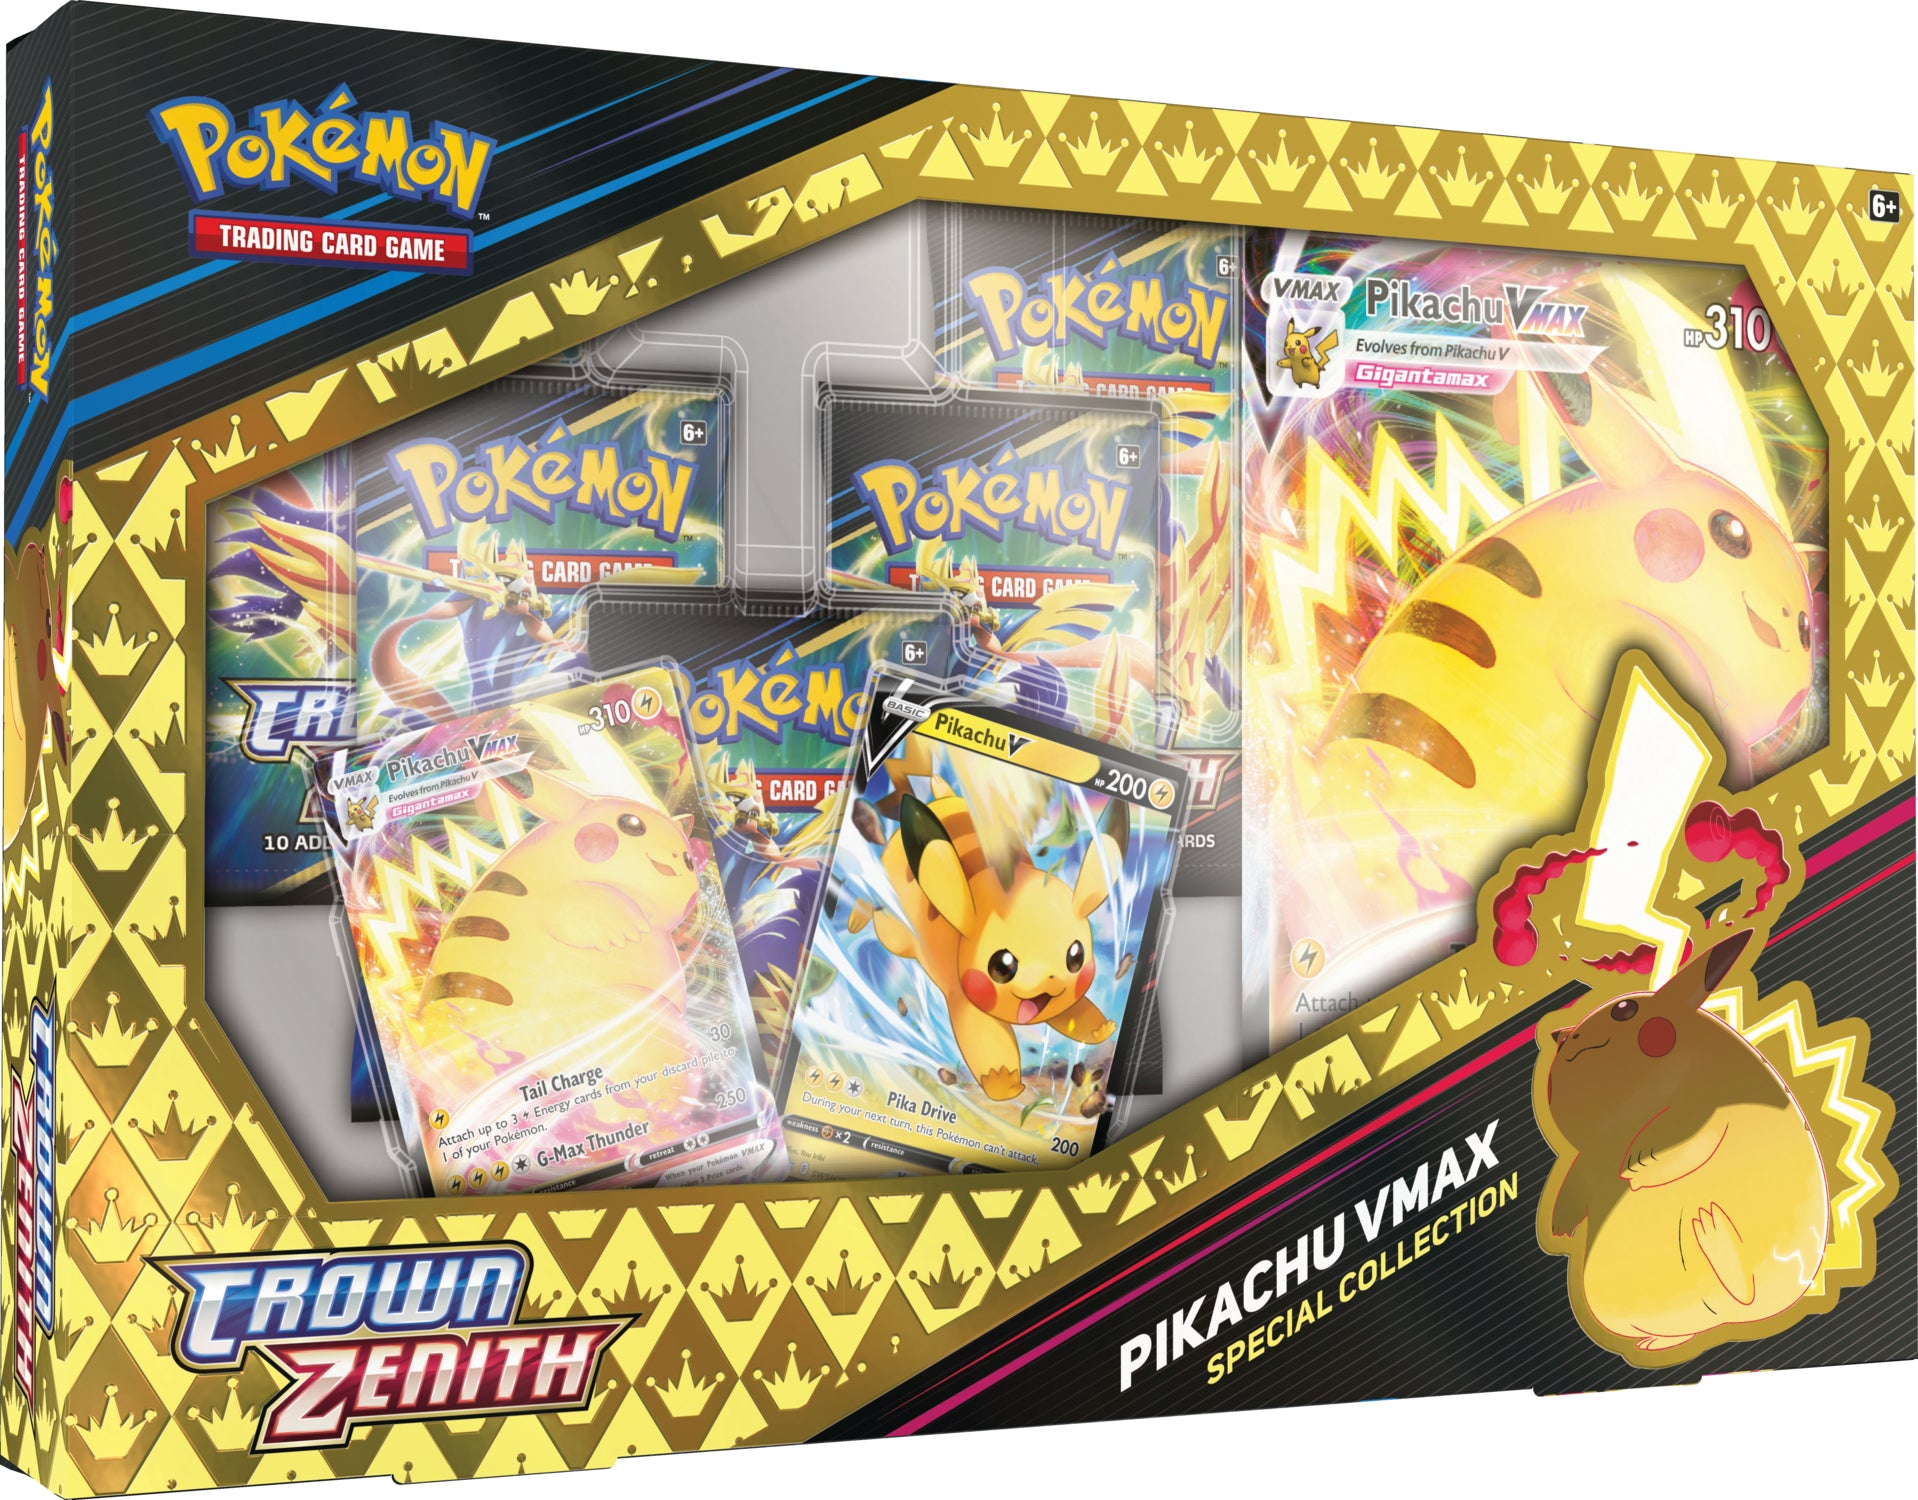 Pokemon Crown Zenith Special Collection - Pikachu VMAX | Mothership Books and Games TX